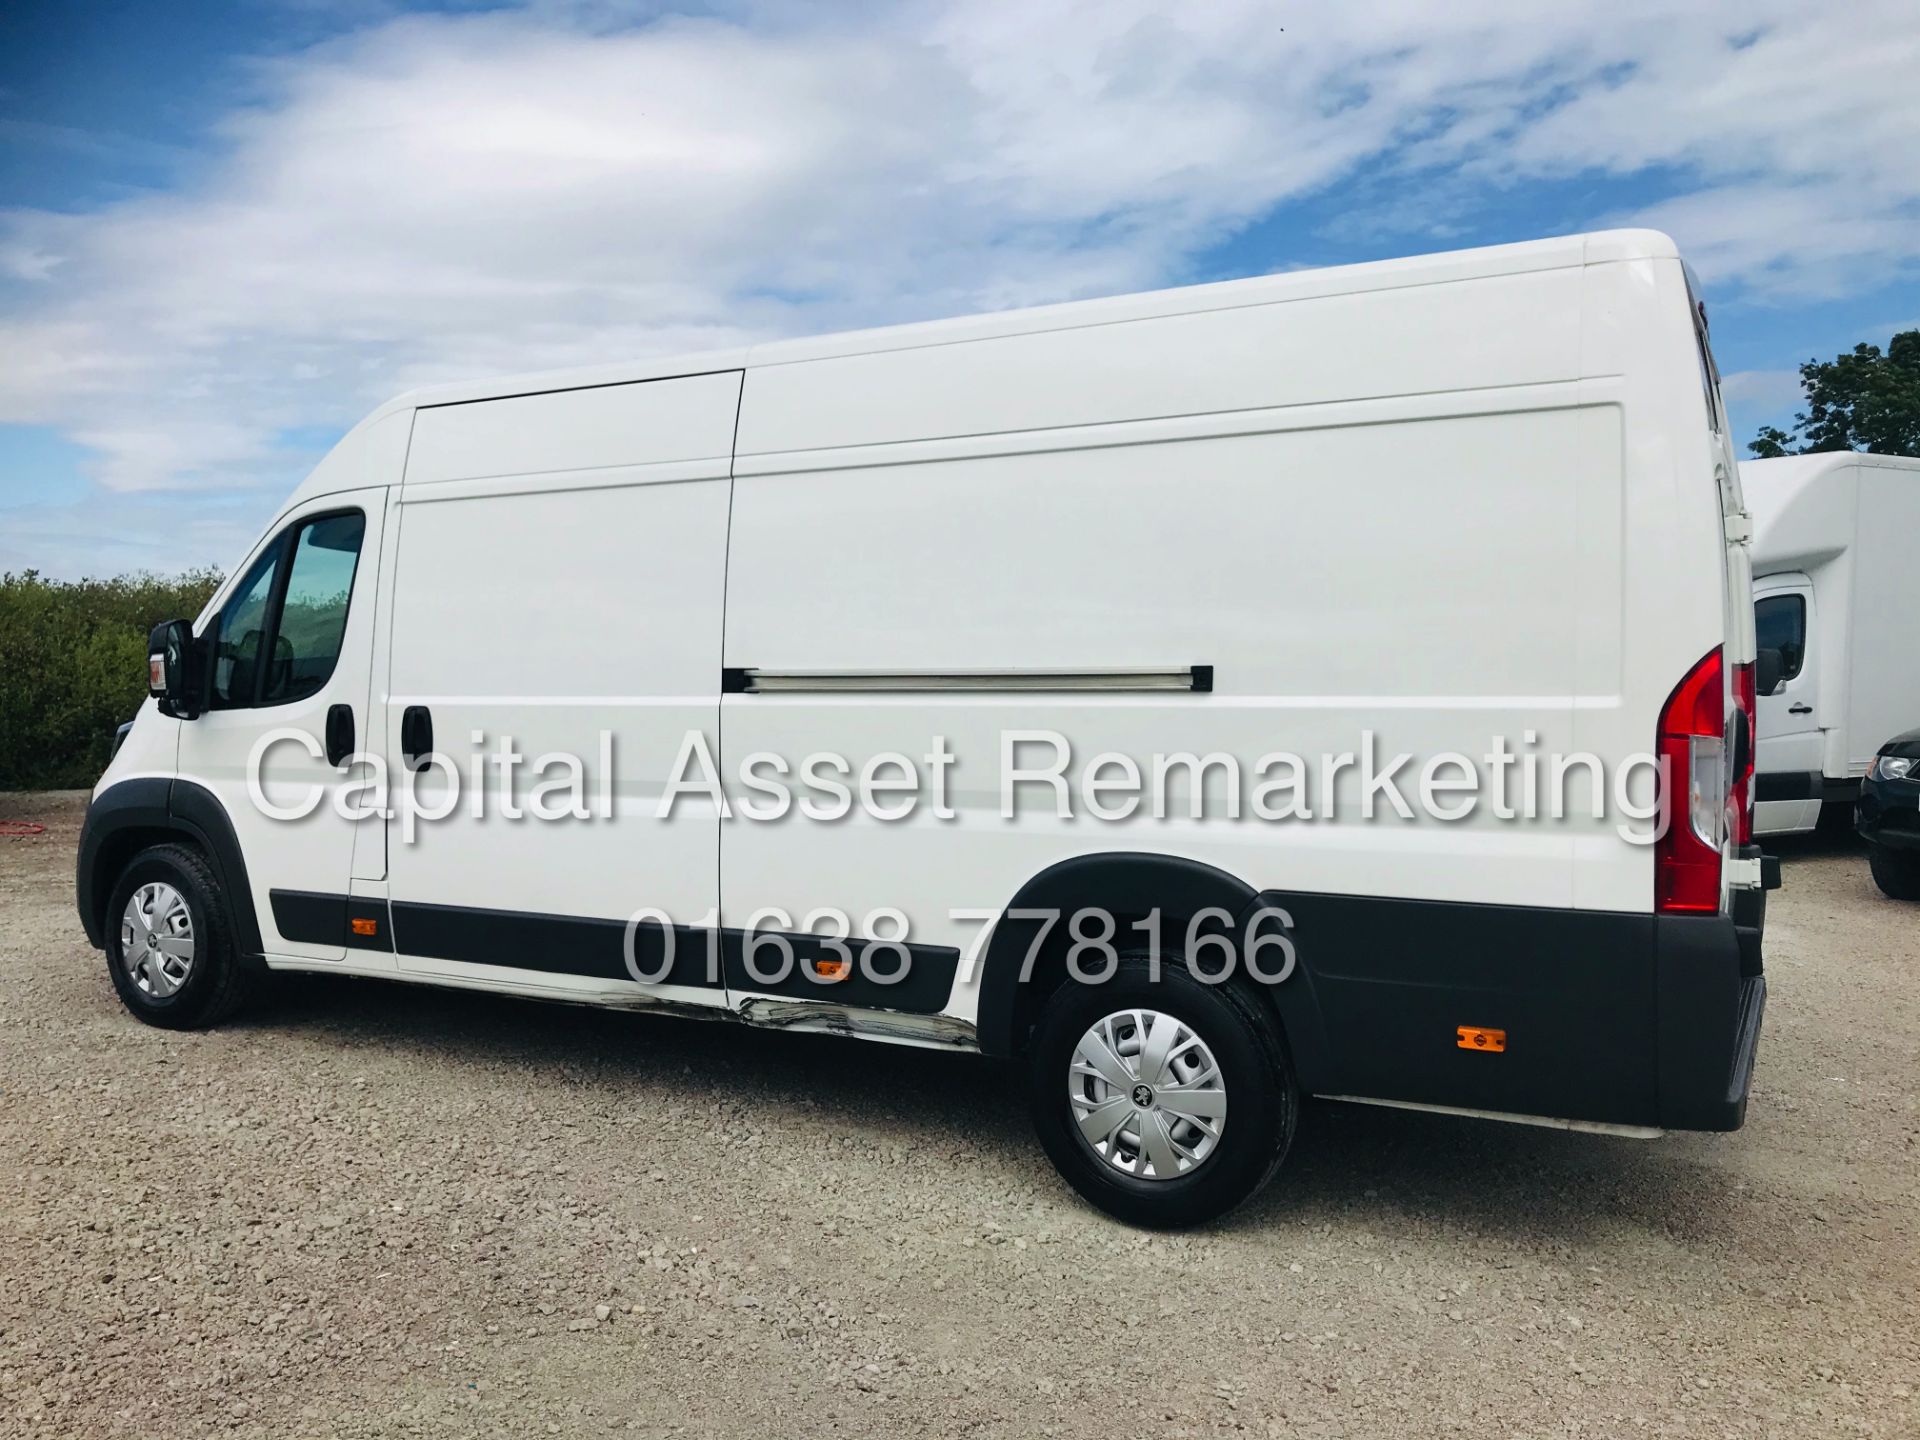 (ON SALE) PEUGEOT BOXER 2.0 BLUE-HDI "PROFESSIONAL" L4 "MAXI" 1 OWNER (2019 MODEL) AIR CON - SAT NAV - Image 9 of 23